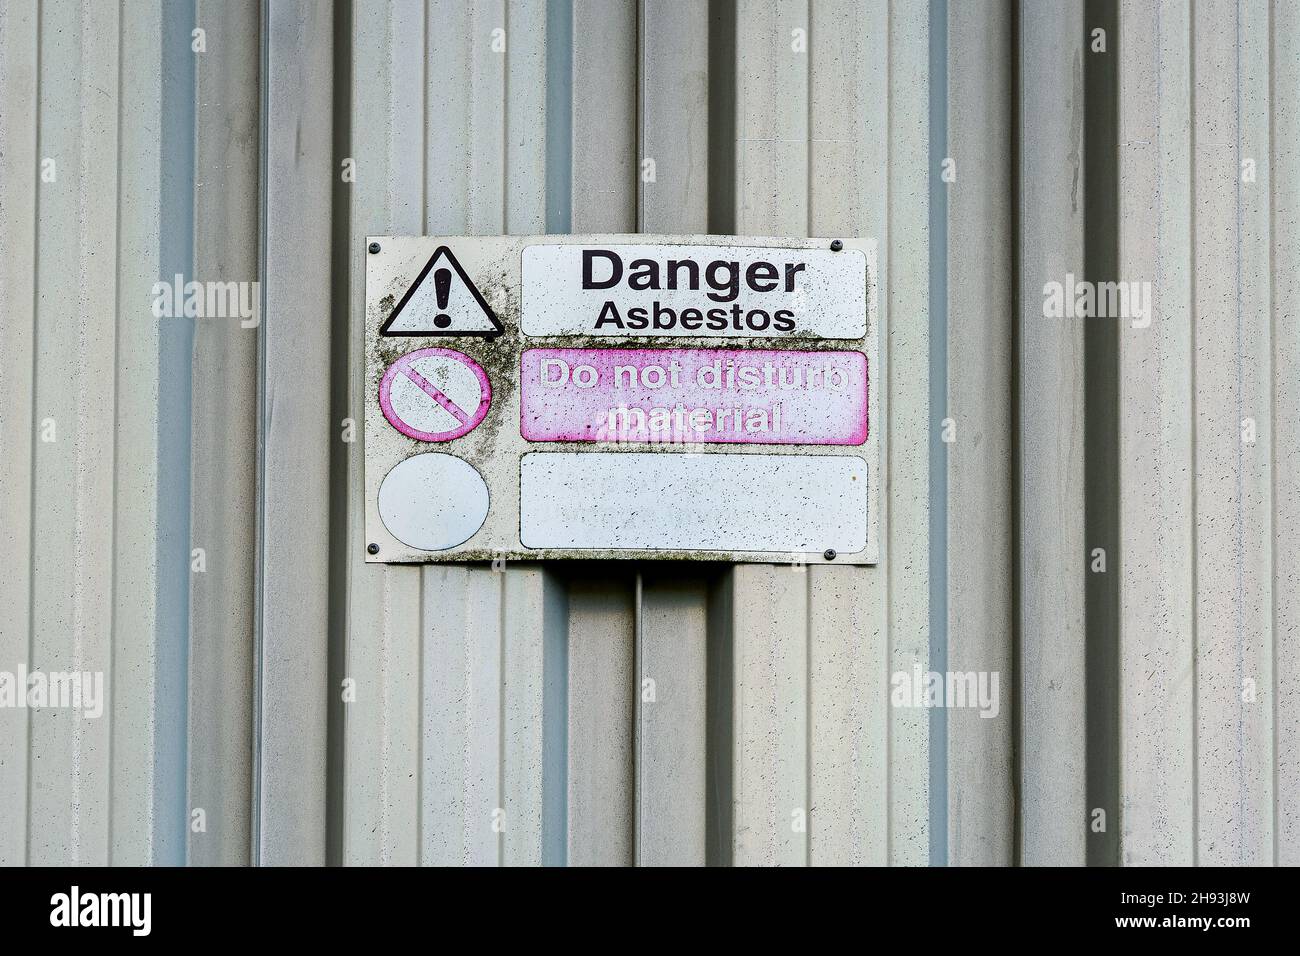 Asbestos danger sign on old galvanised shed wall. Stock Photo